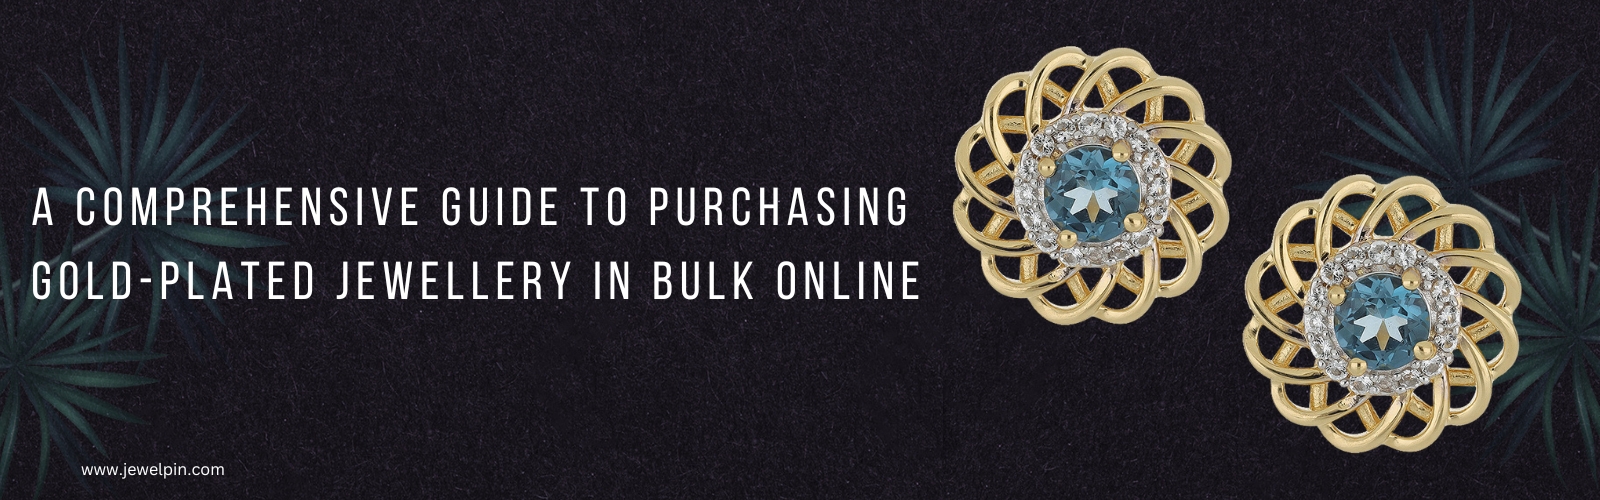 A Comprehensive Guide to Purchasing Gold-Plated Jewellery in Bulk Online - Jewelpin